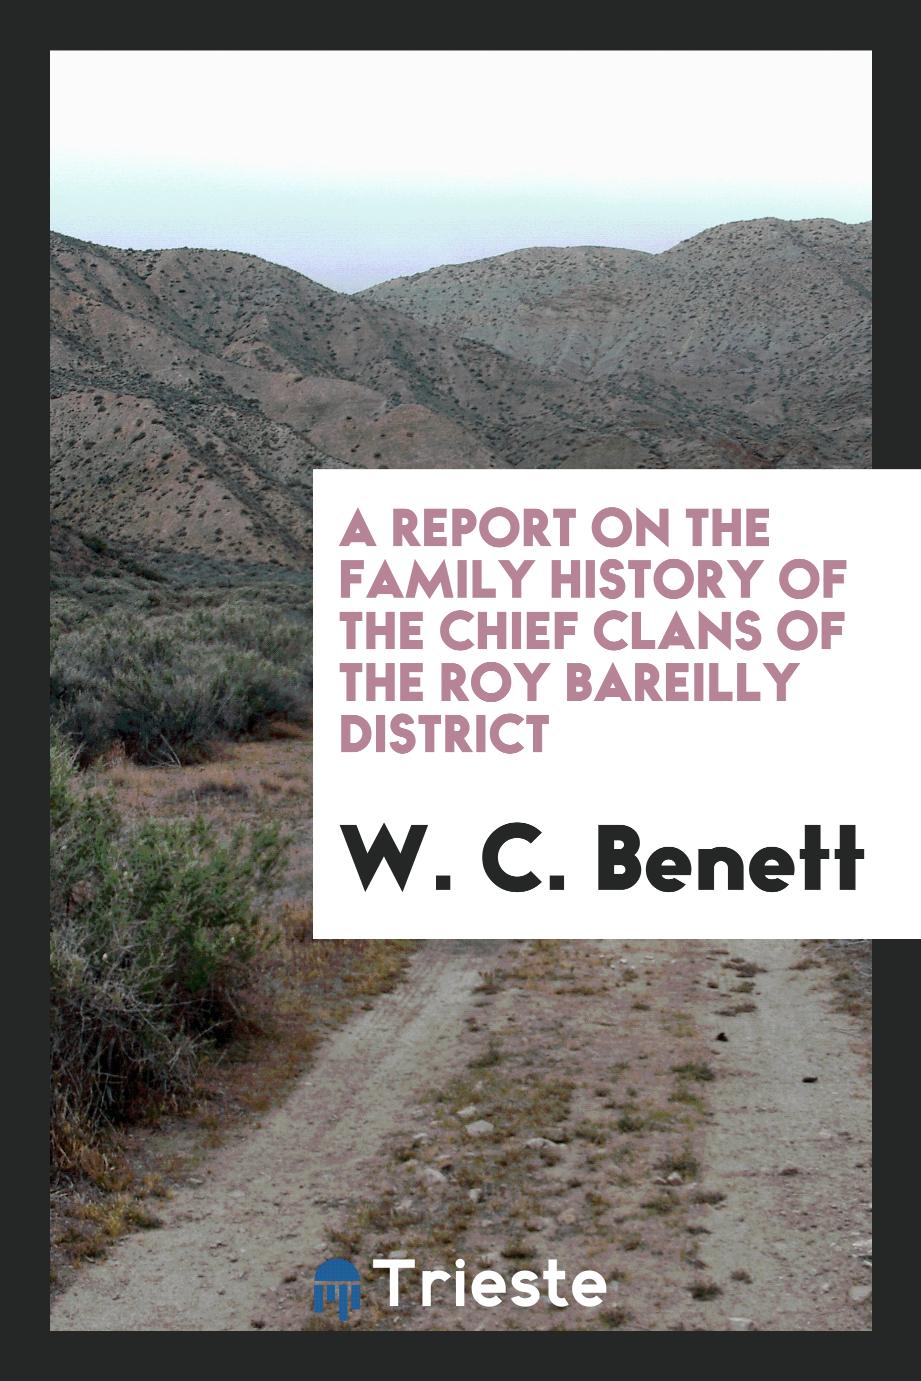 A Report on the Family History of the Chief Clans of the Roy Bareilly District